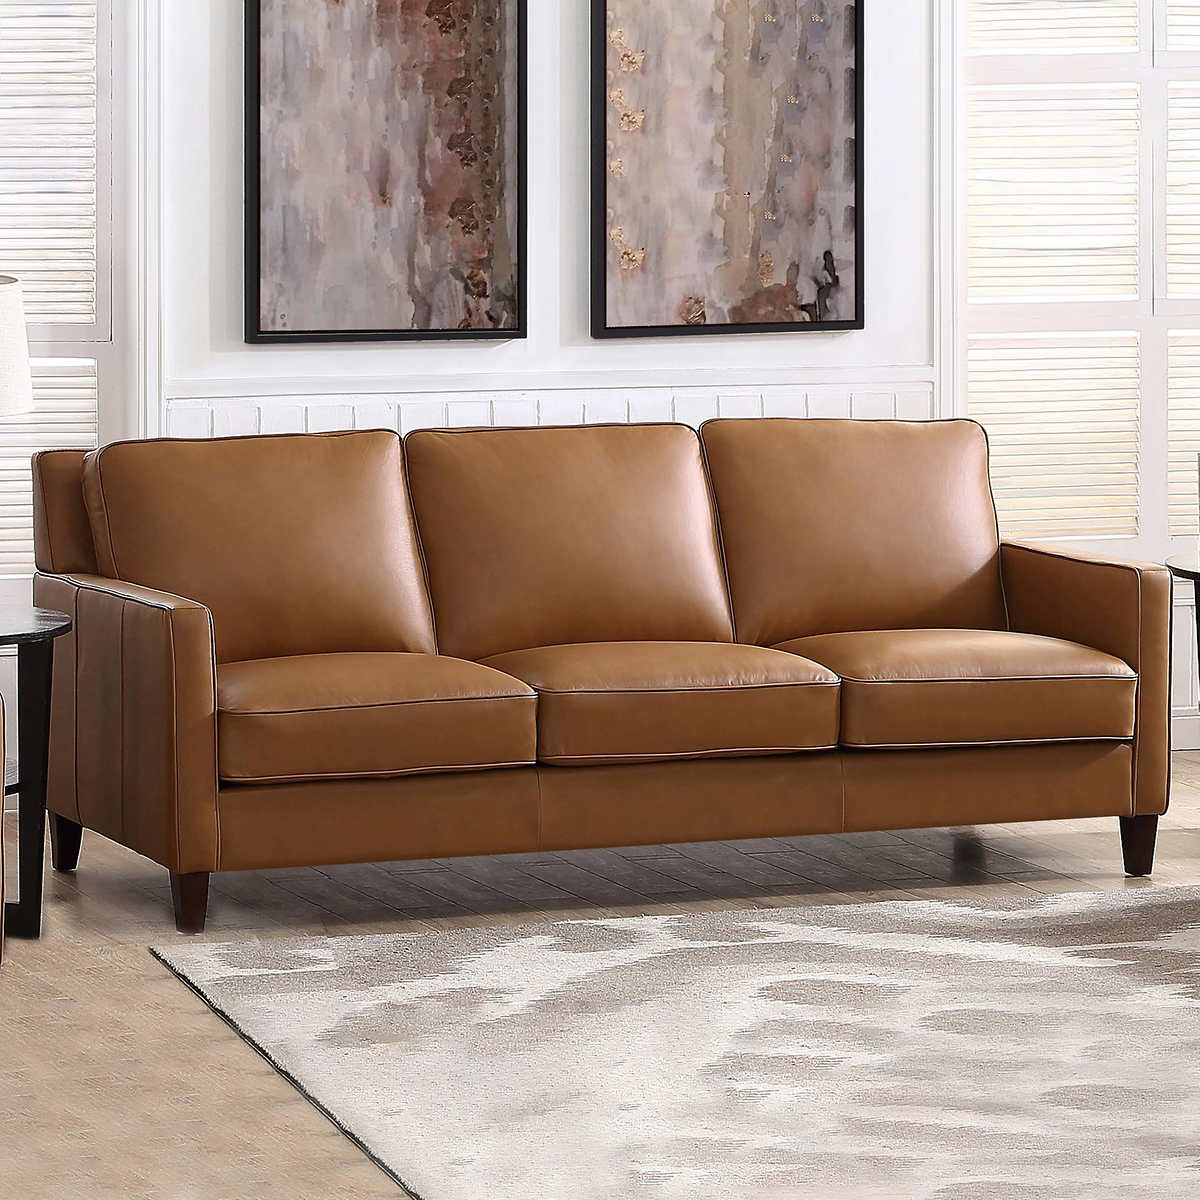 West Park Leather Sofa Costco, Cheers Leather Sofa Costco Reviews